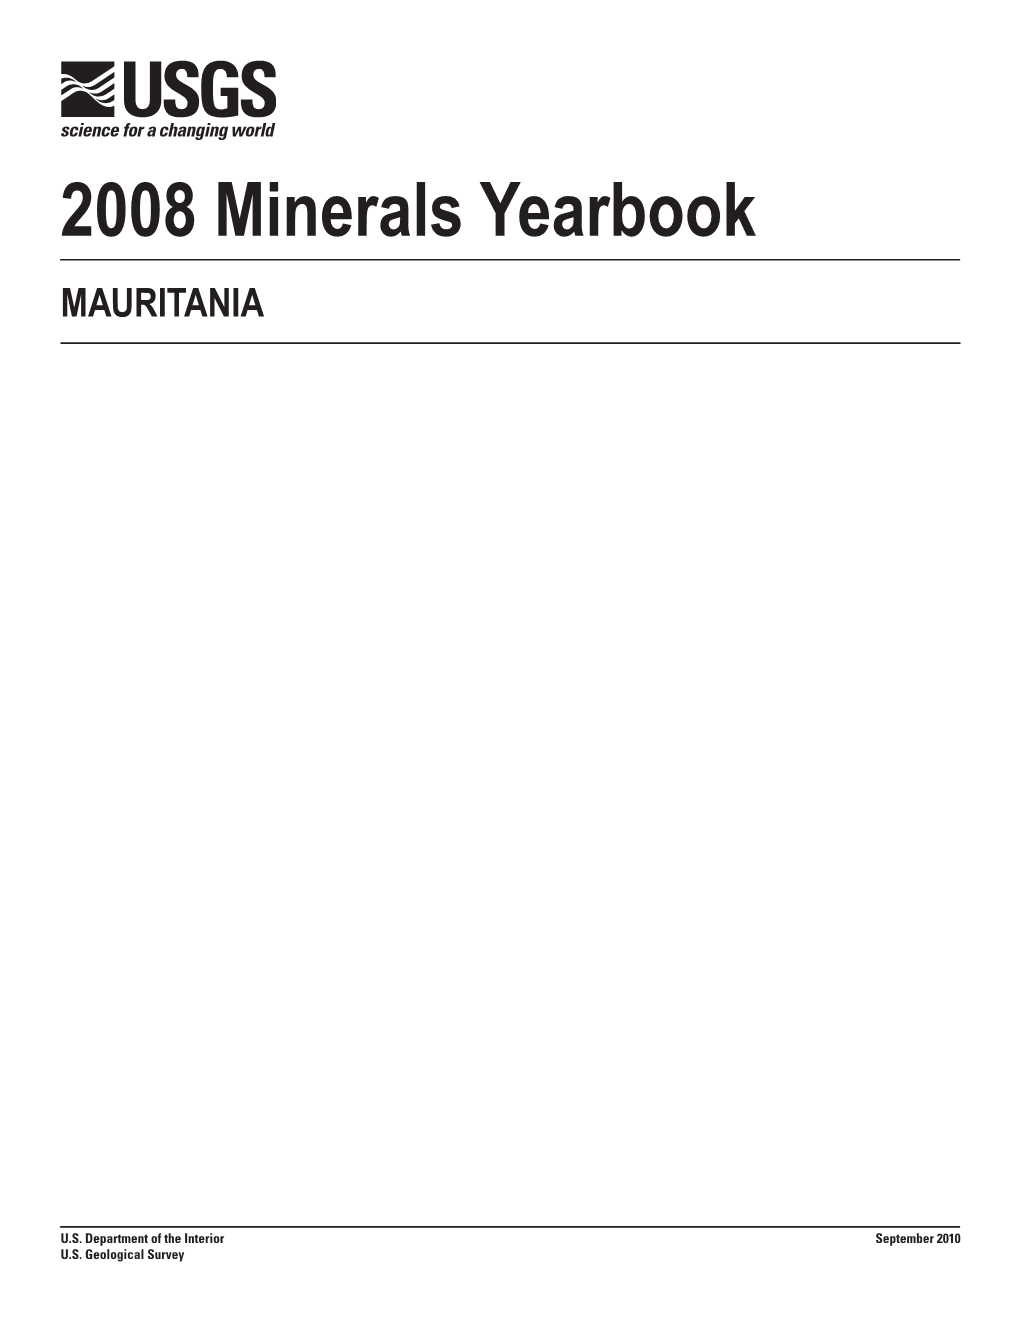 The Mineral Industry of Mauritania in 2008